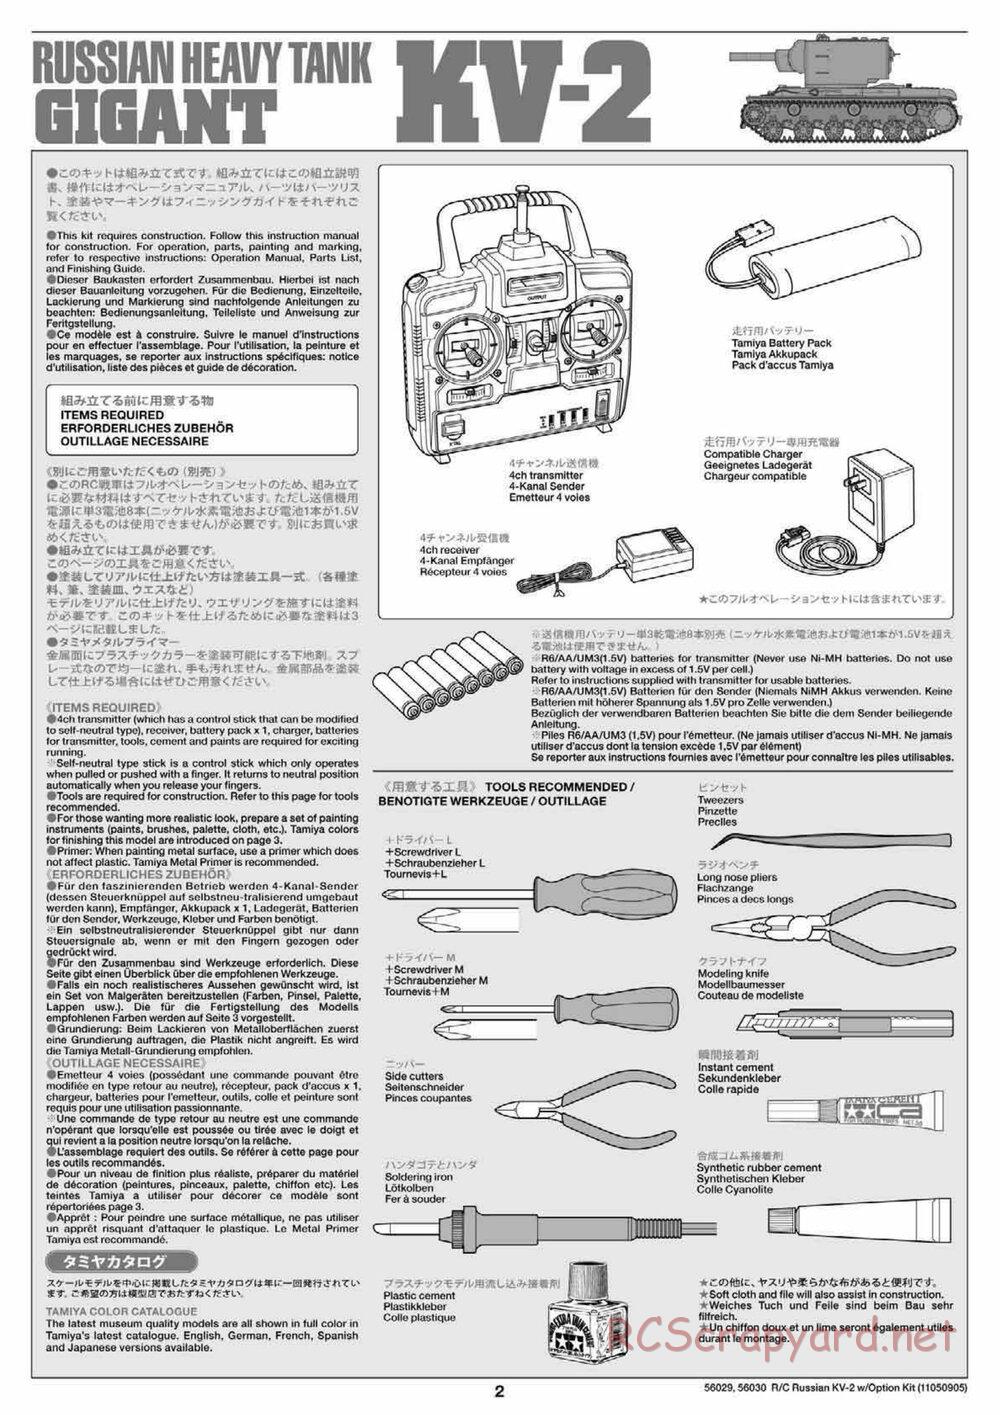 Tamiya - Russian Heavy Tank KV-2 Gigant - 1/16 Scale Chassis - Manual - Page 2